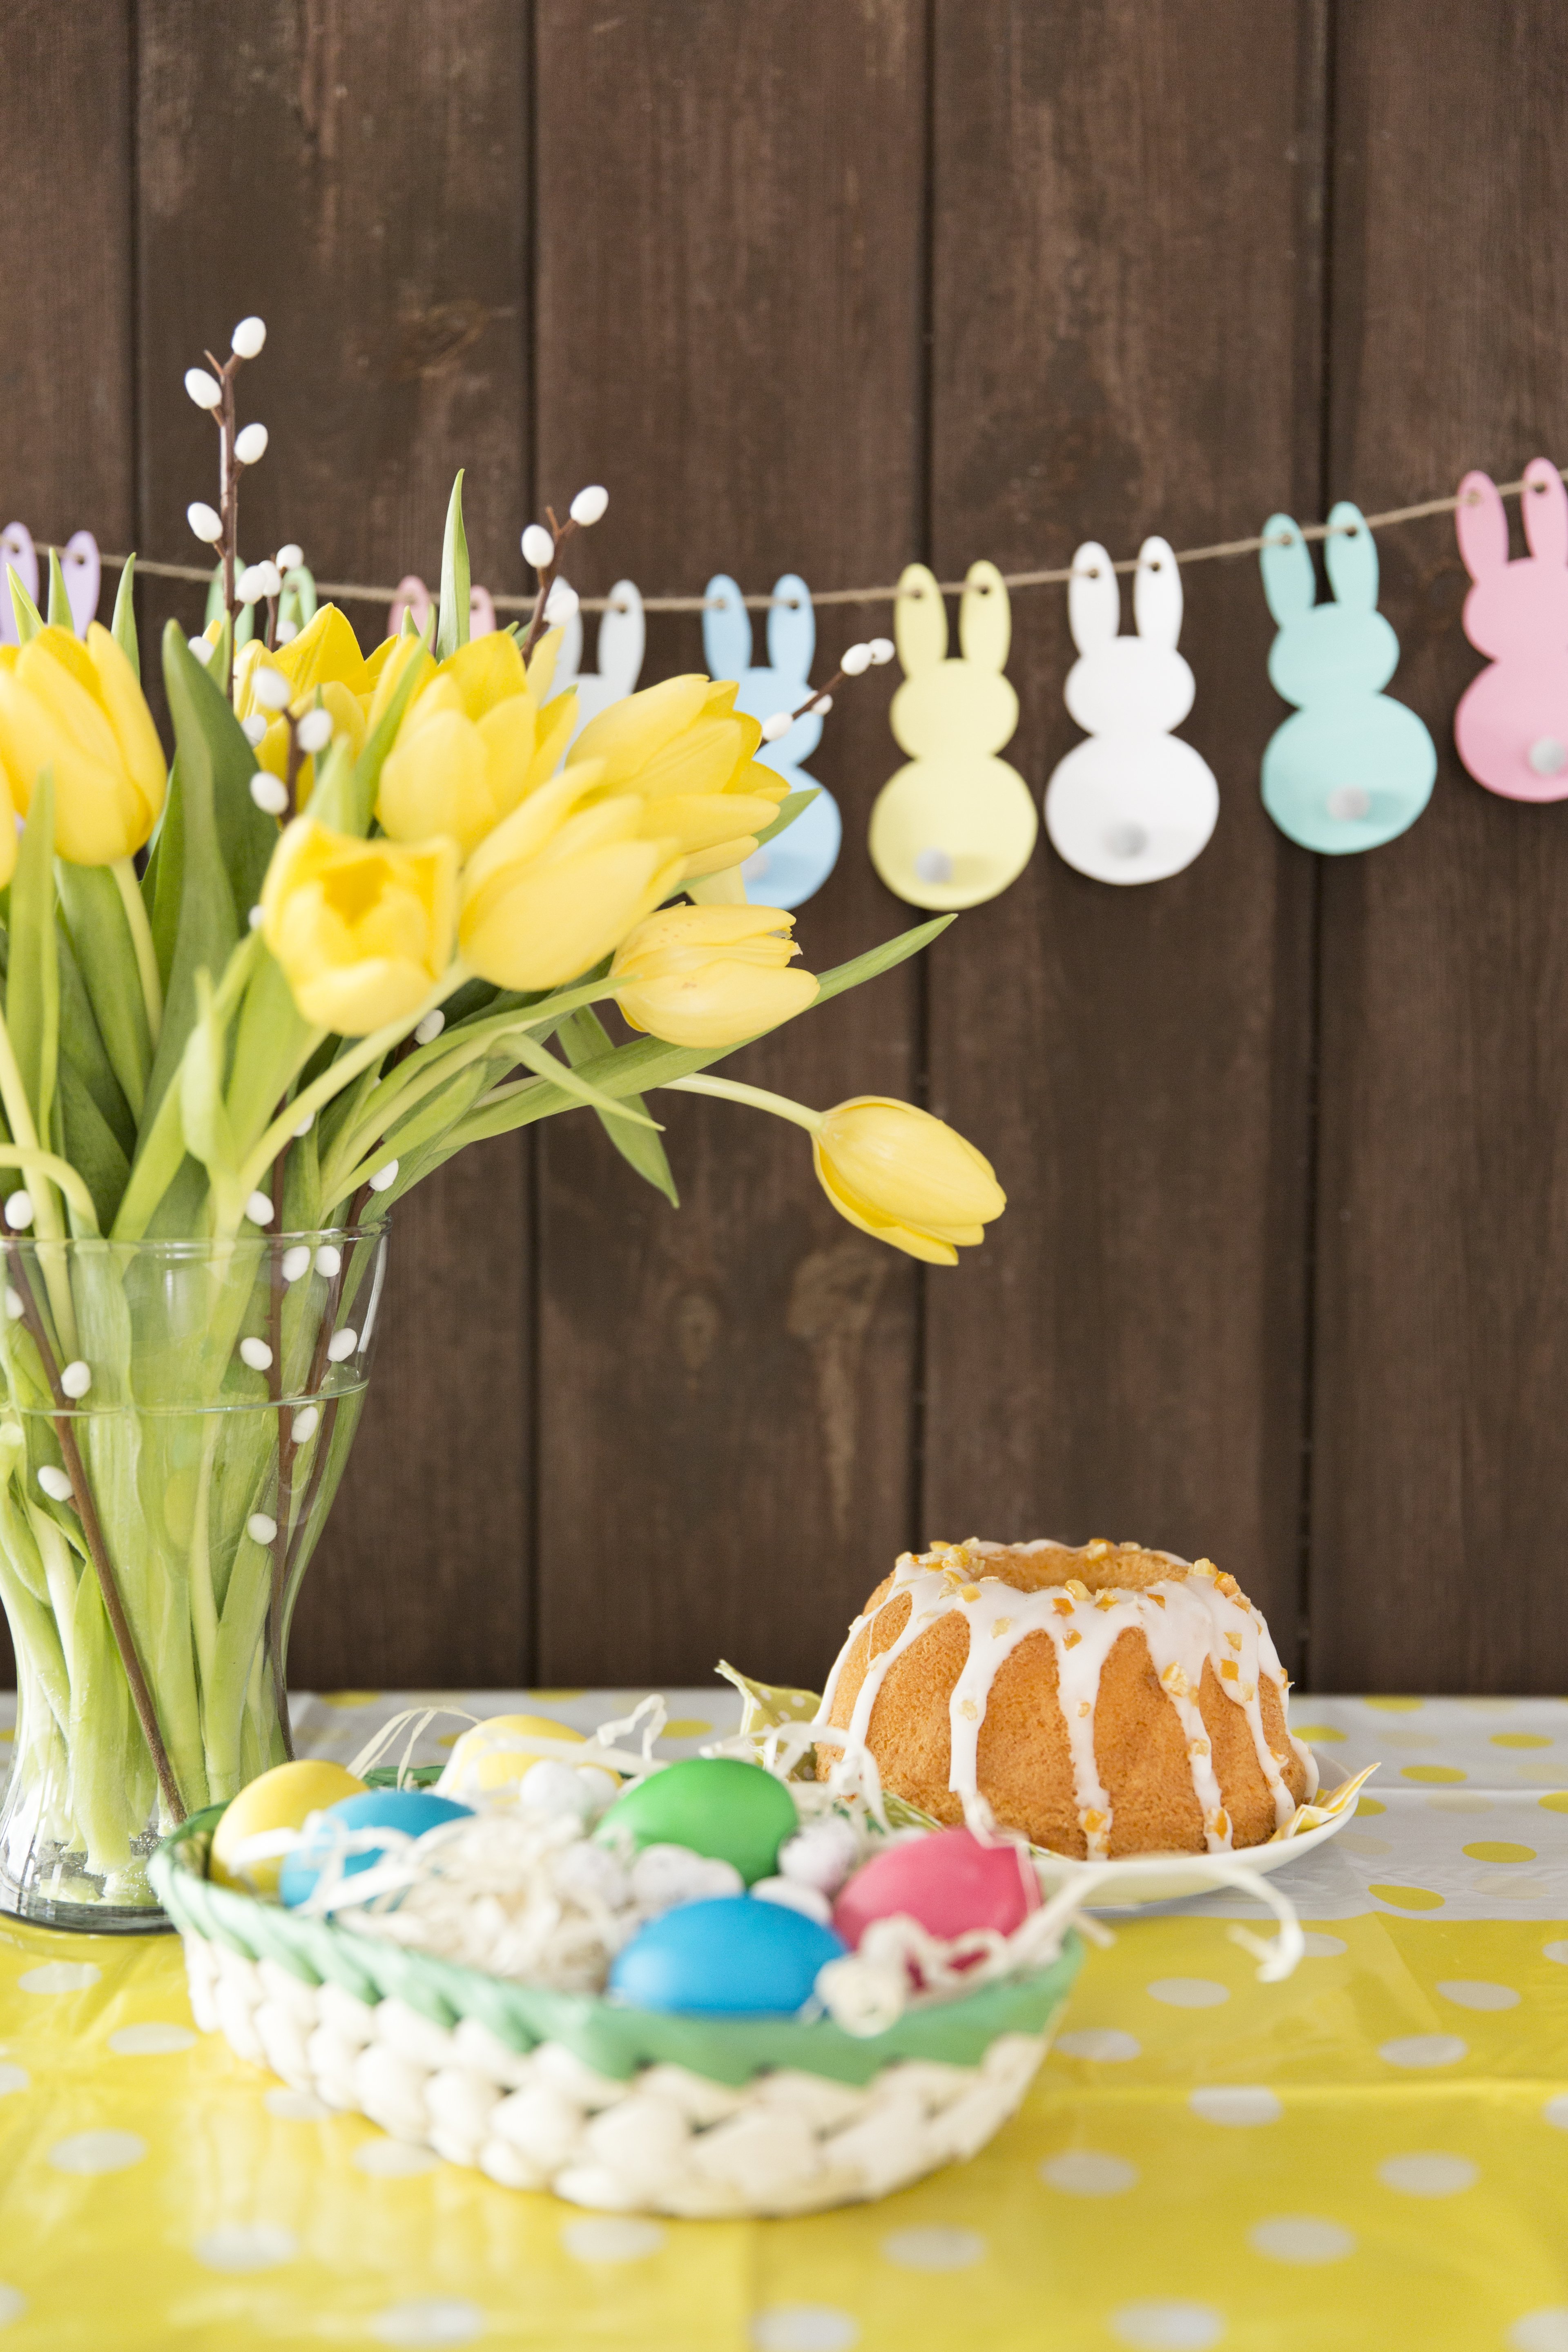 Painted eggs and carrot cake with Easter decorations. | Source: Freepik